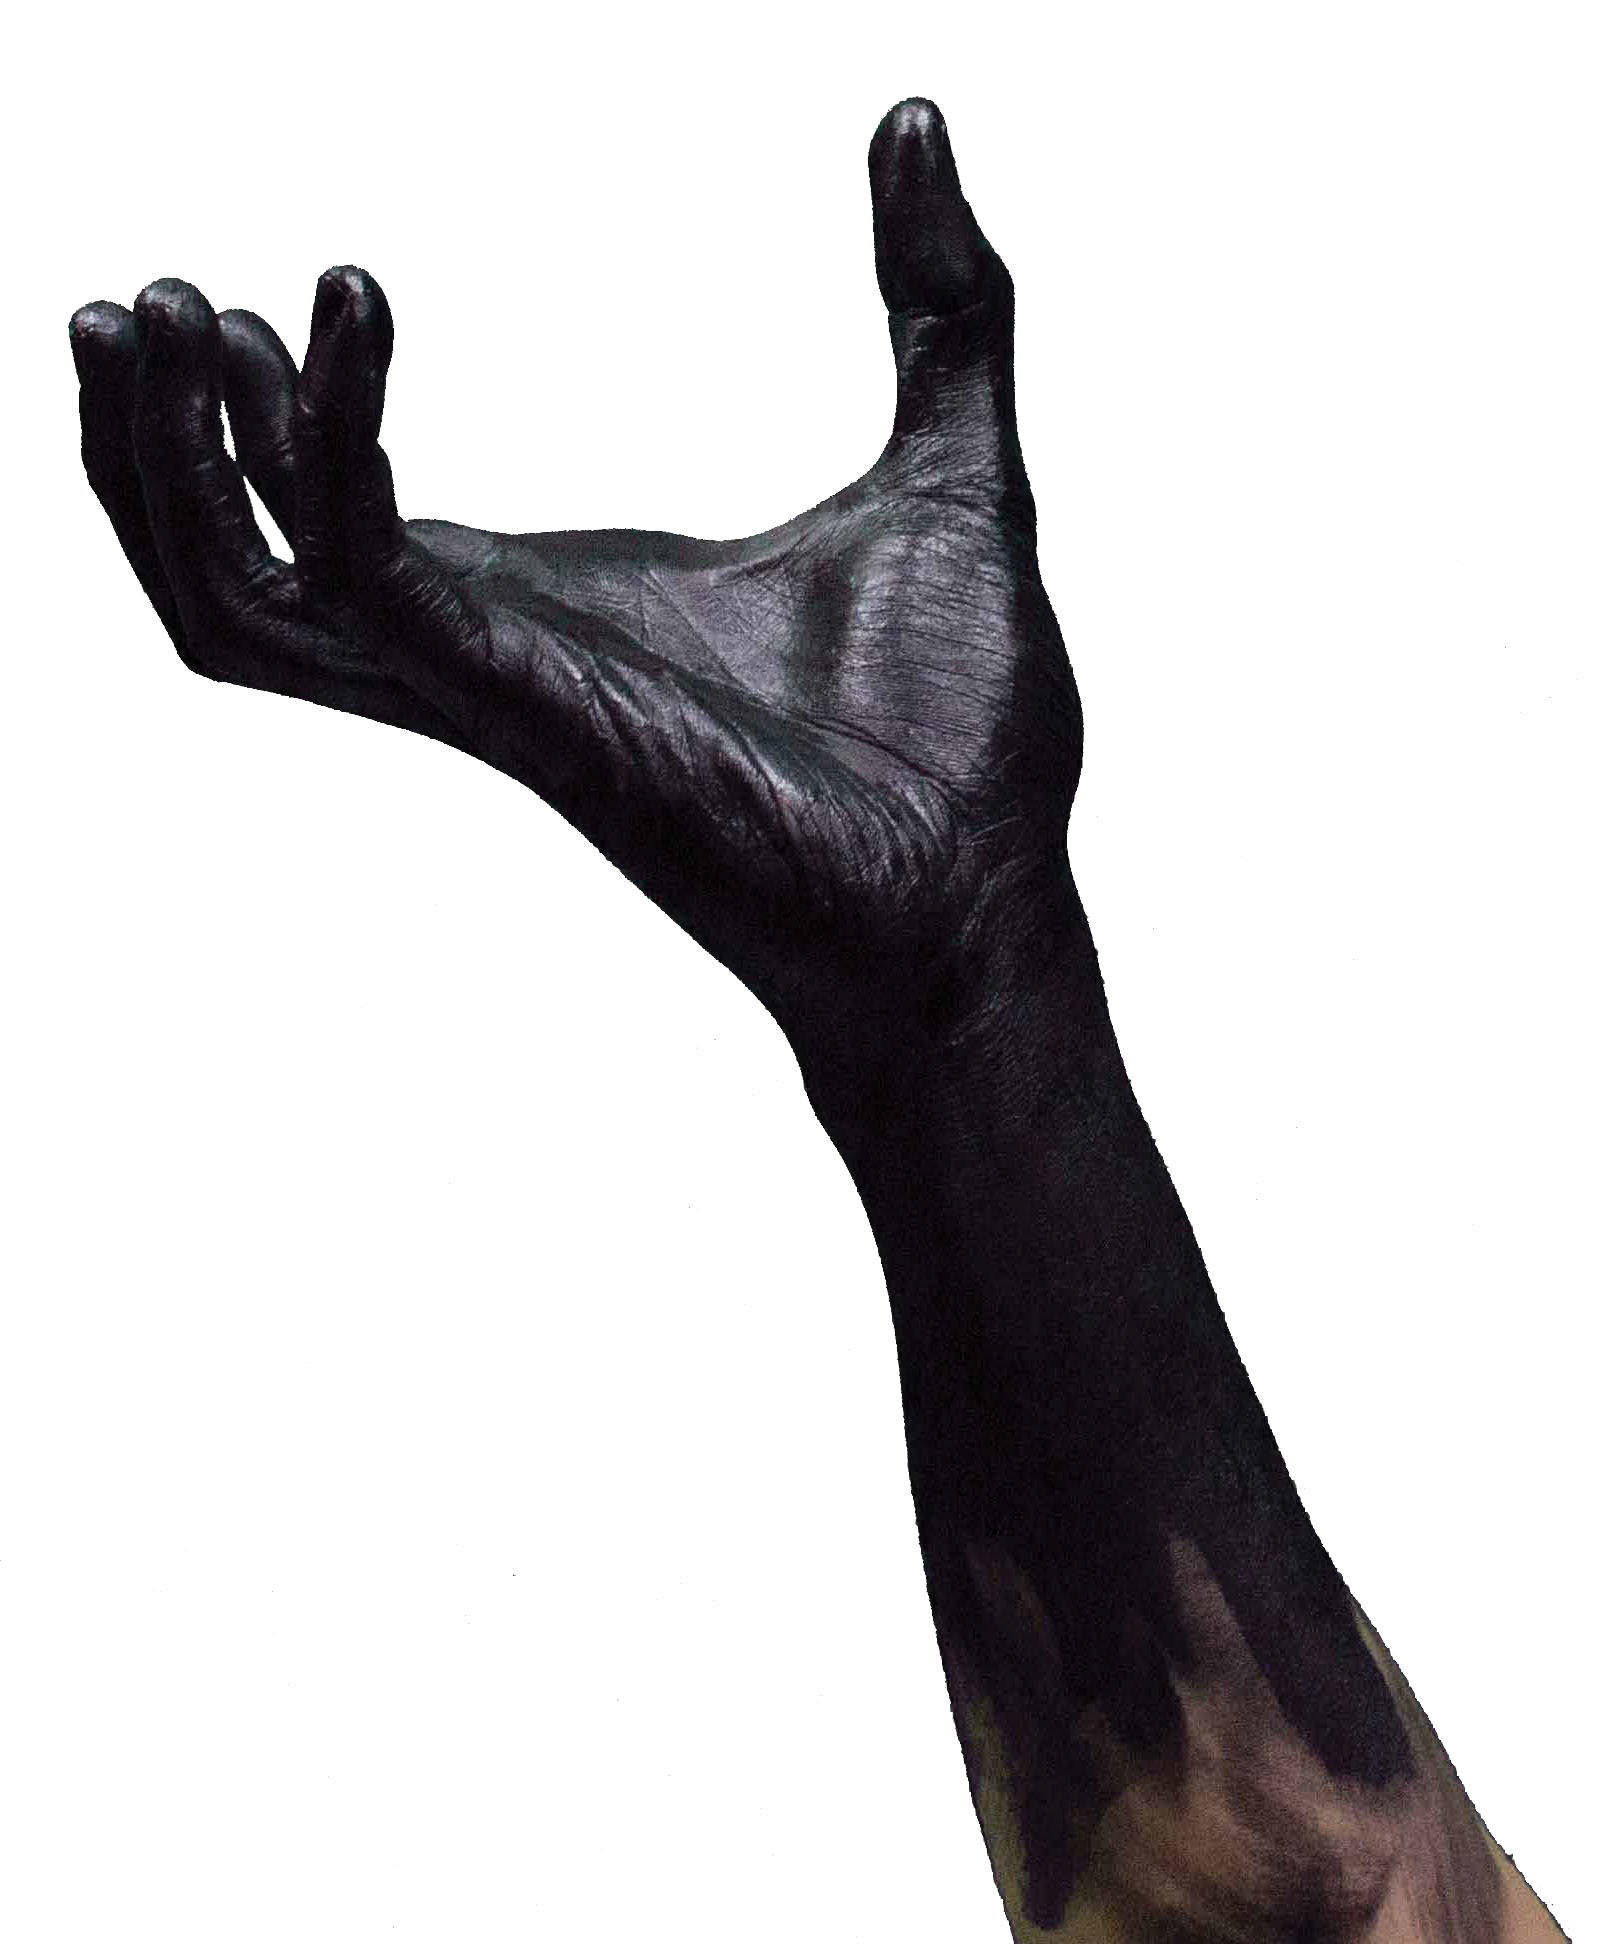 photo of arm reaching upwards covered in black ink